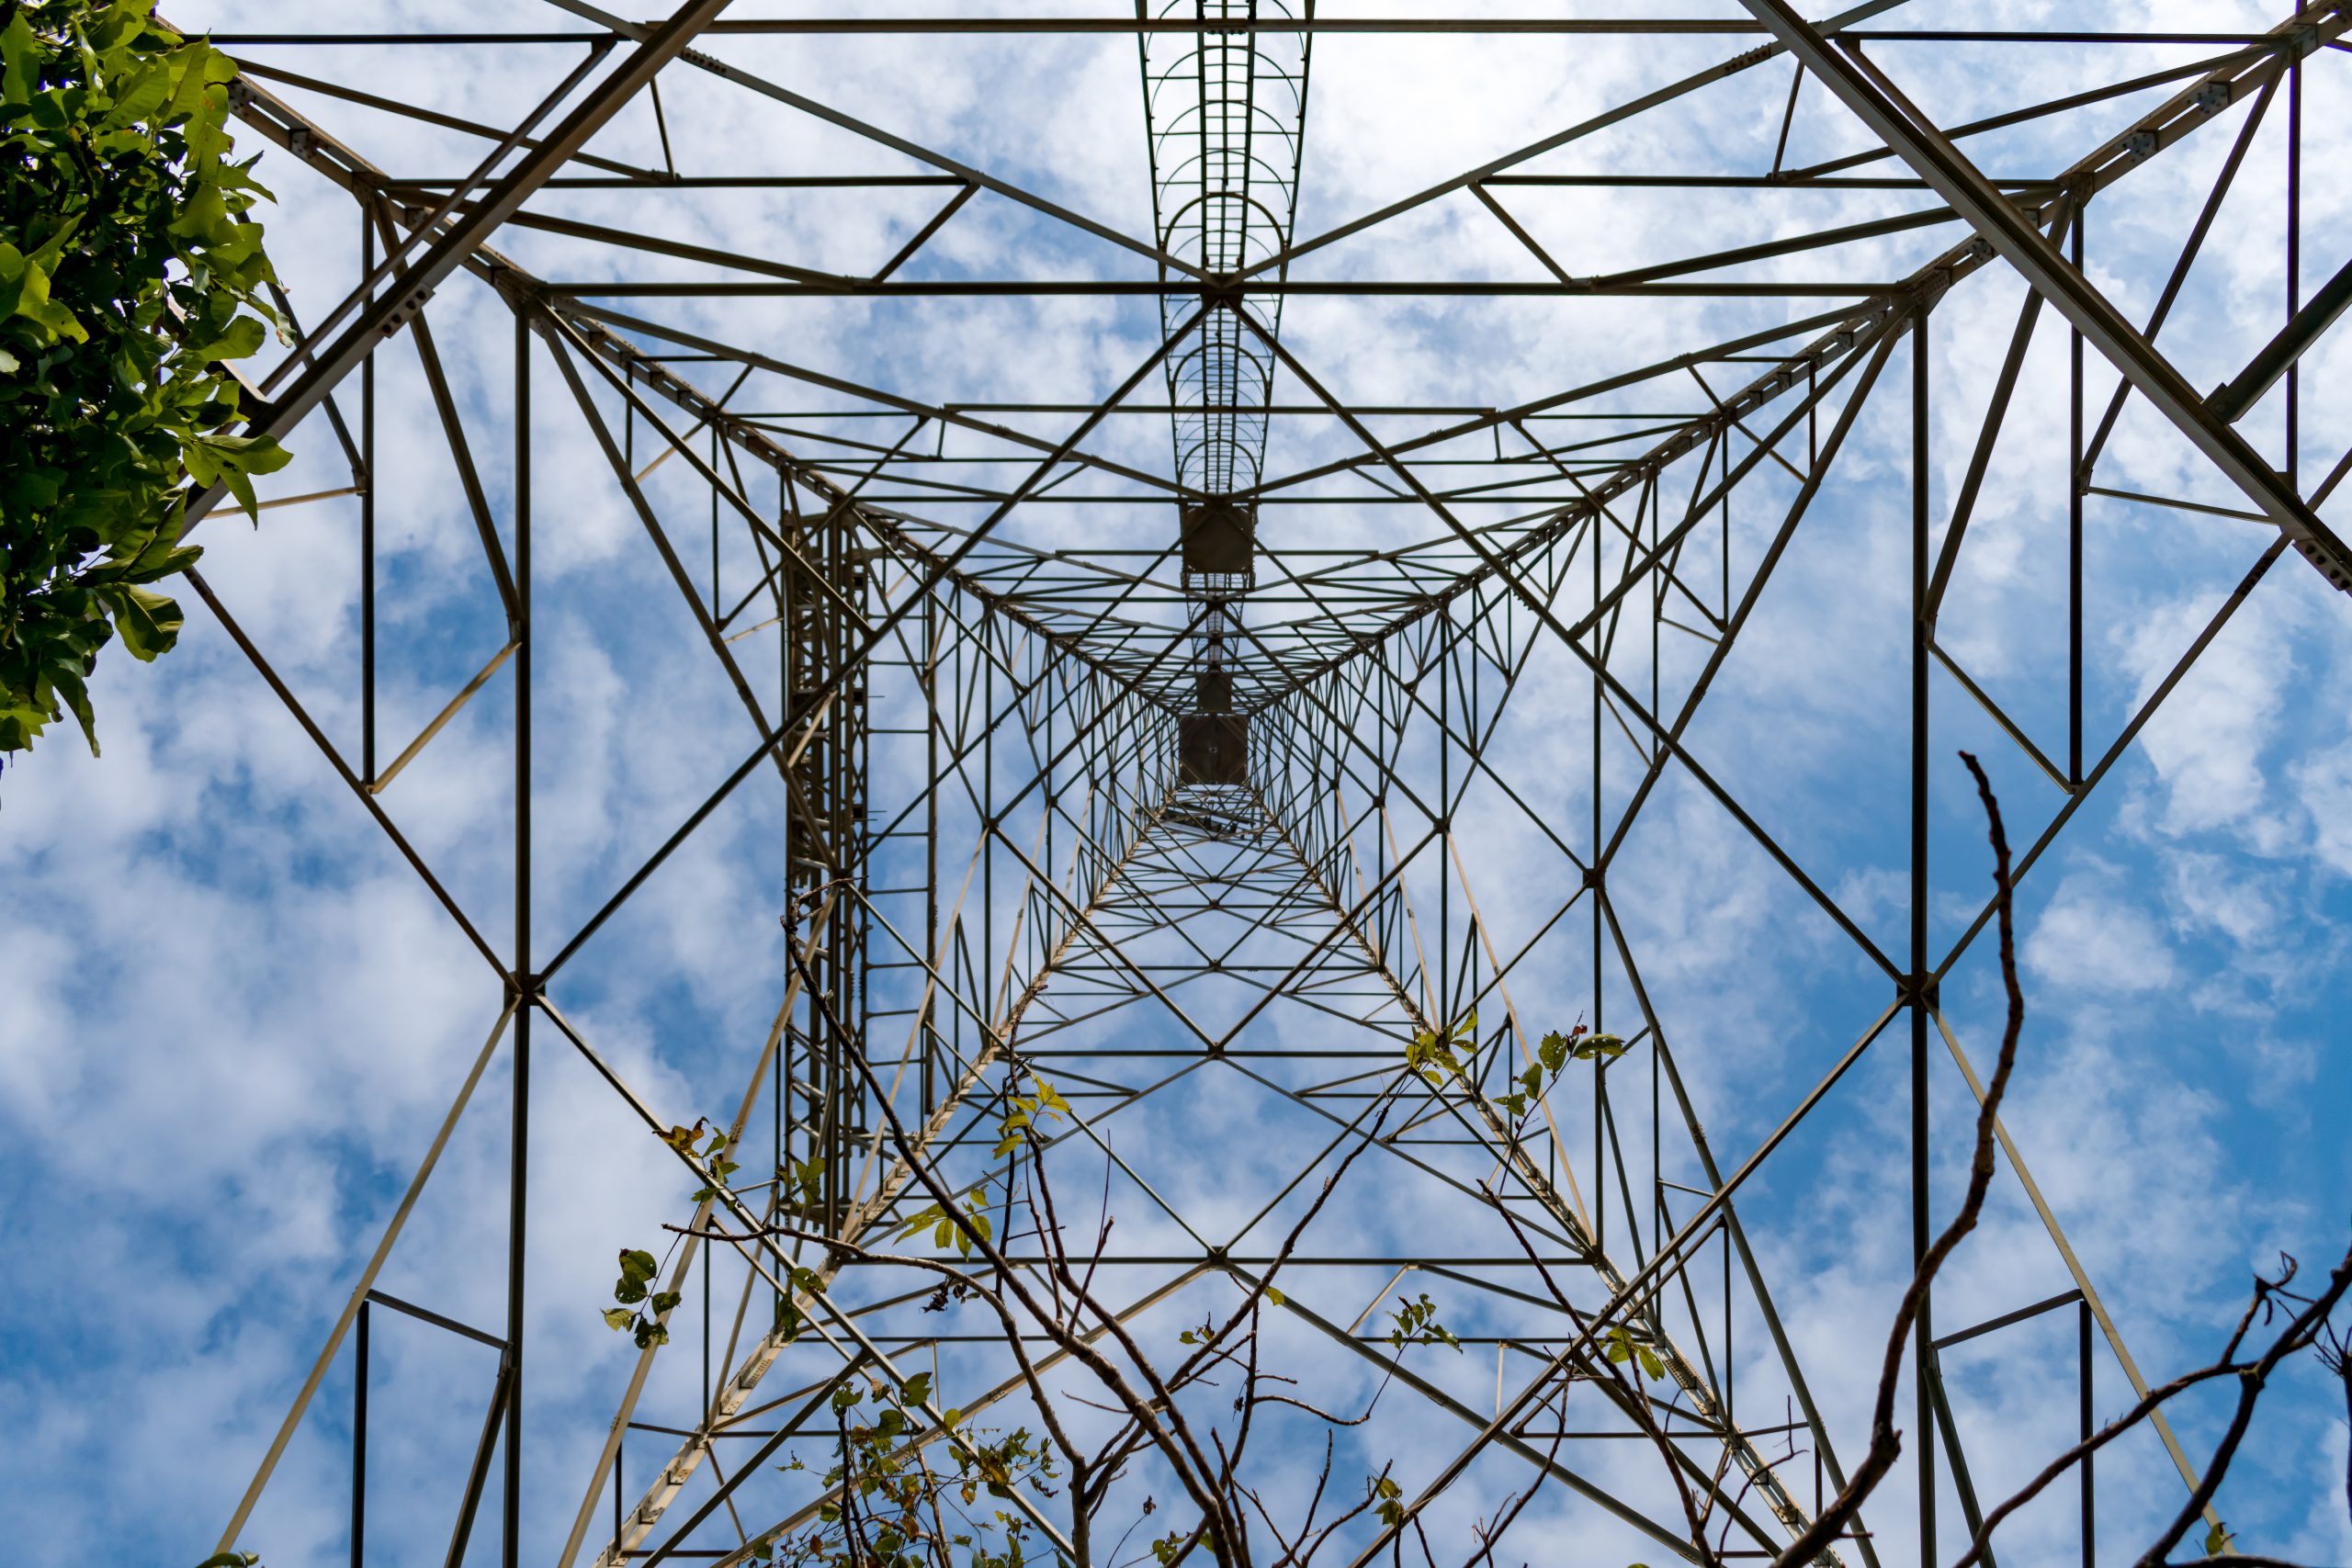 Inner view of an transmission tower